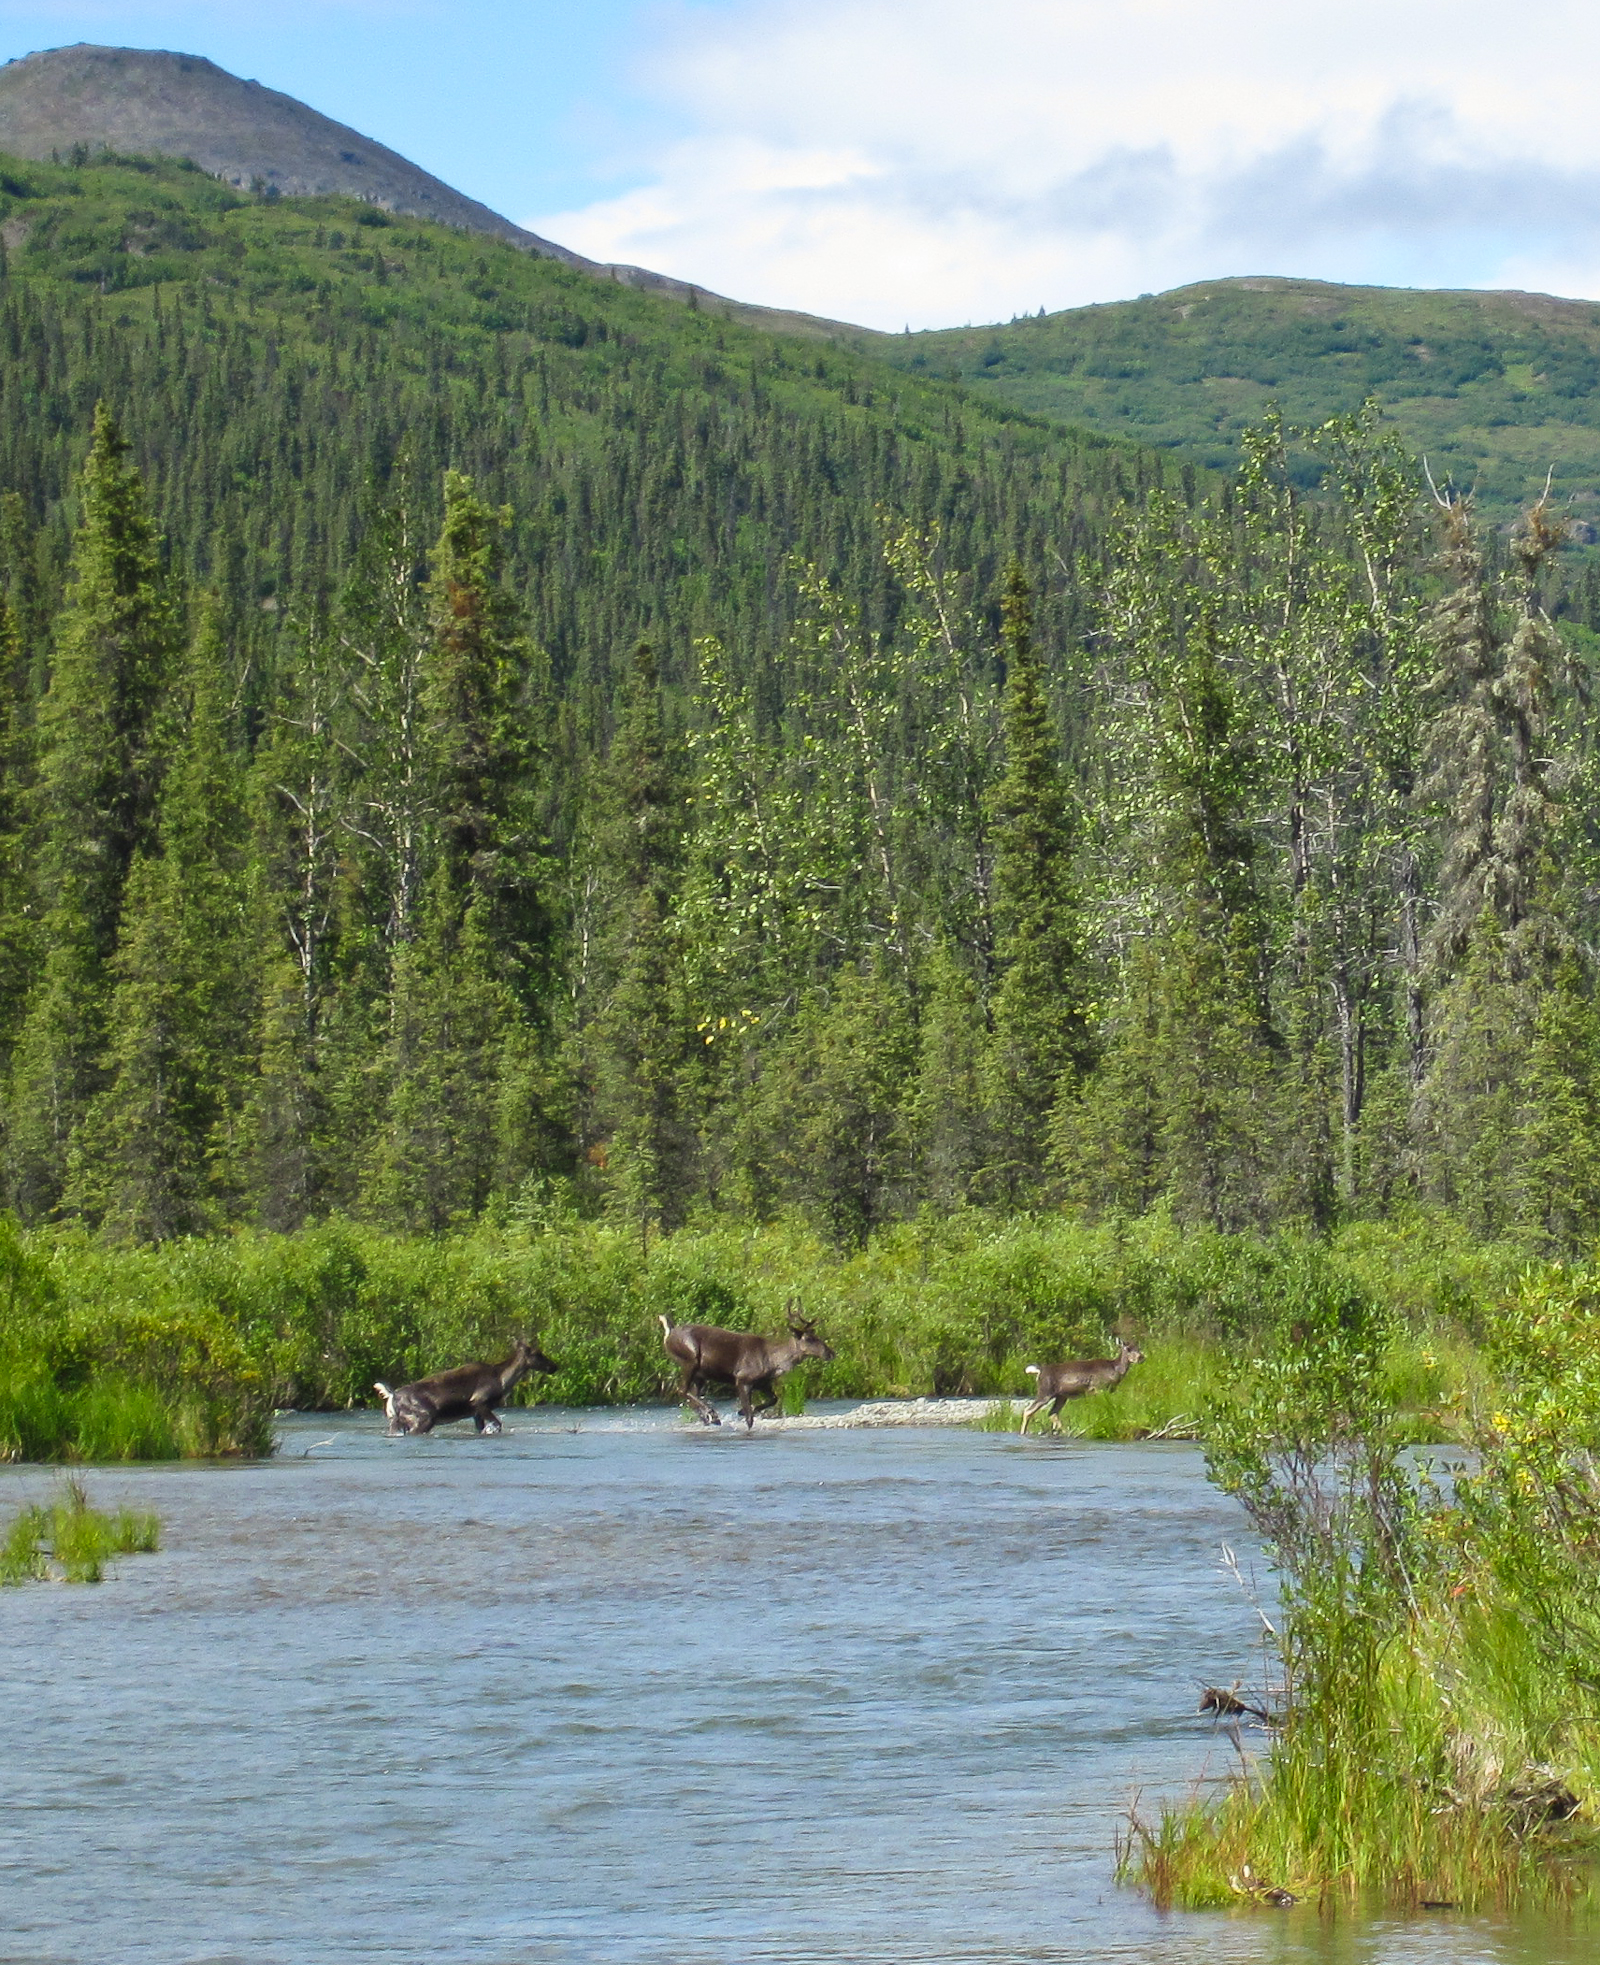 While I was taking pictures of the whitefish I caught, I heard loud splashing in the water upstream.  Two caribou cows and their calves were crossing the river.  (Only one calf is visible here.) From the Gulkana River in Alaska.